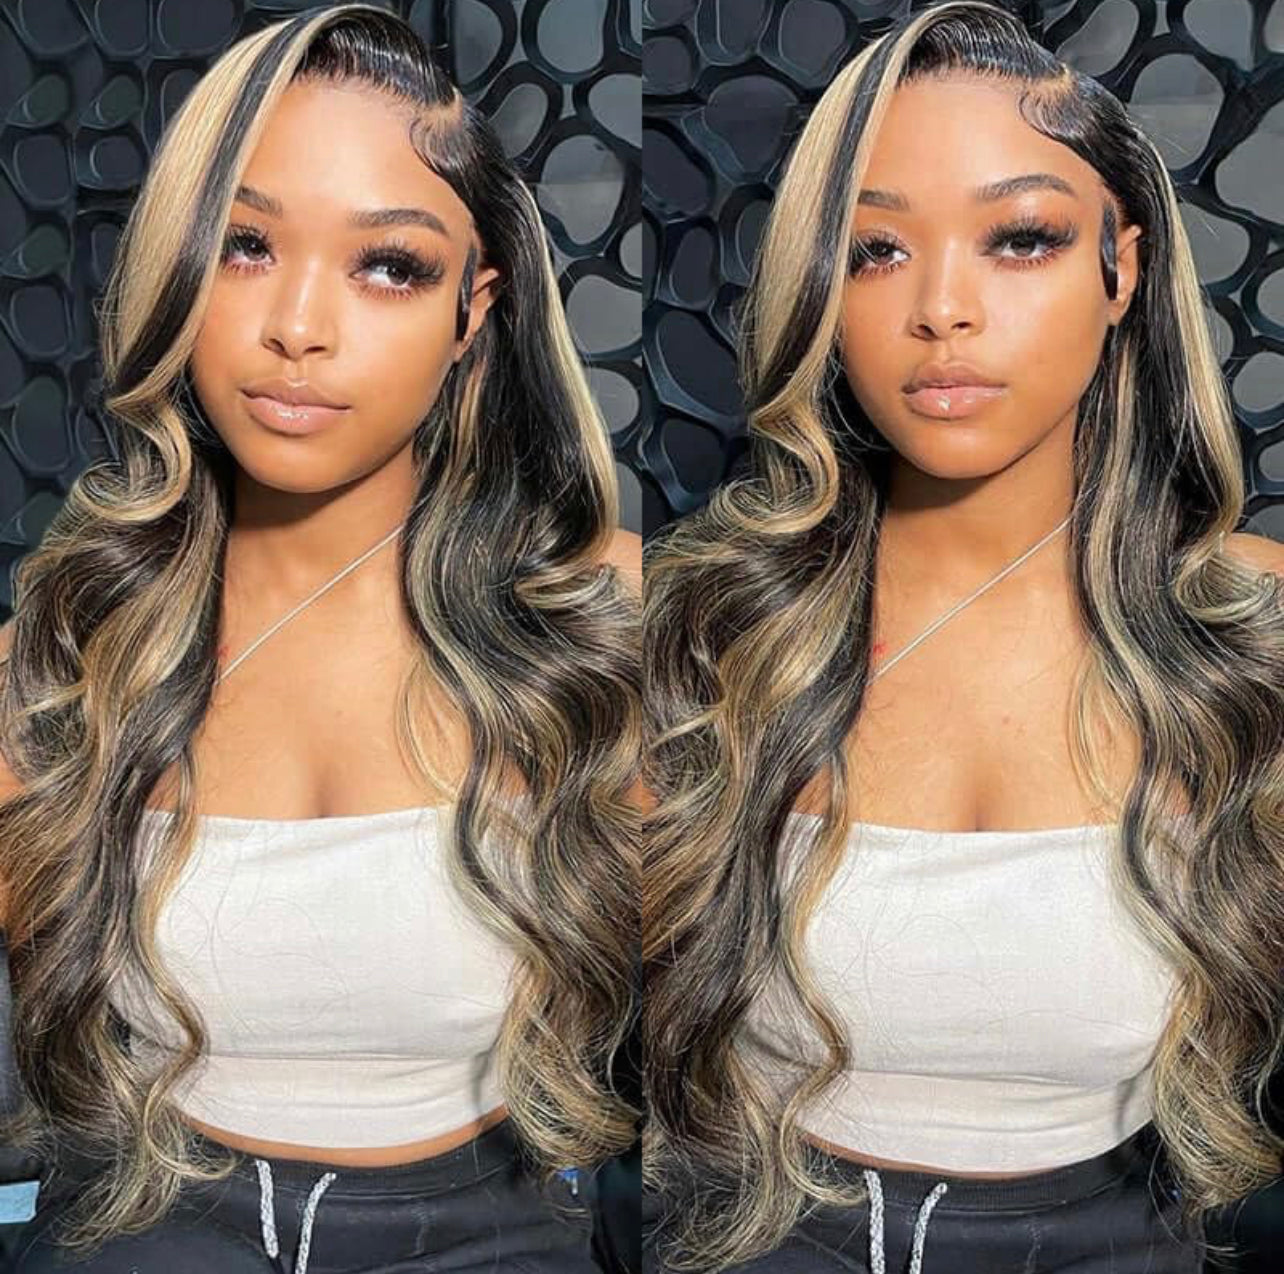 Laboss beauty Wear and Go Glueless Wigs Human Hair Pre Plucked Pre Cut 6x5 Closure Wigs Human Hair Balayage Body Wave Wig Human Hair 220% Density Highlight Ombre Wig with Bleached Tiny Knots 1b/27 24 Inch